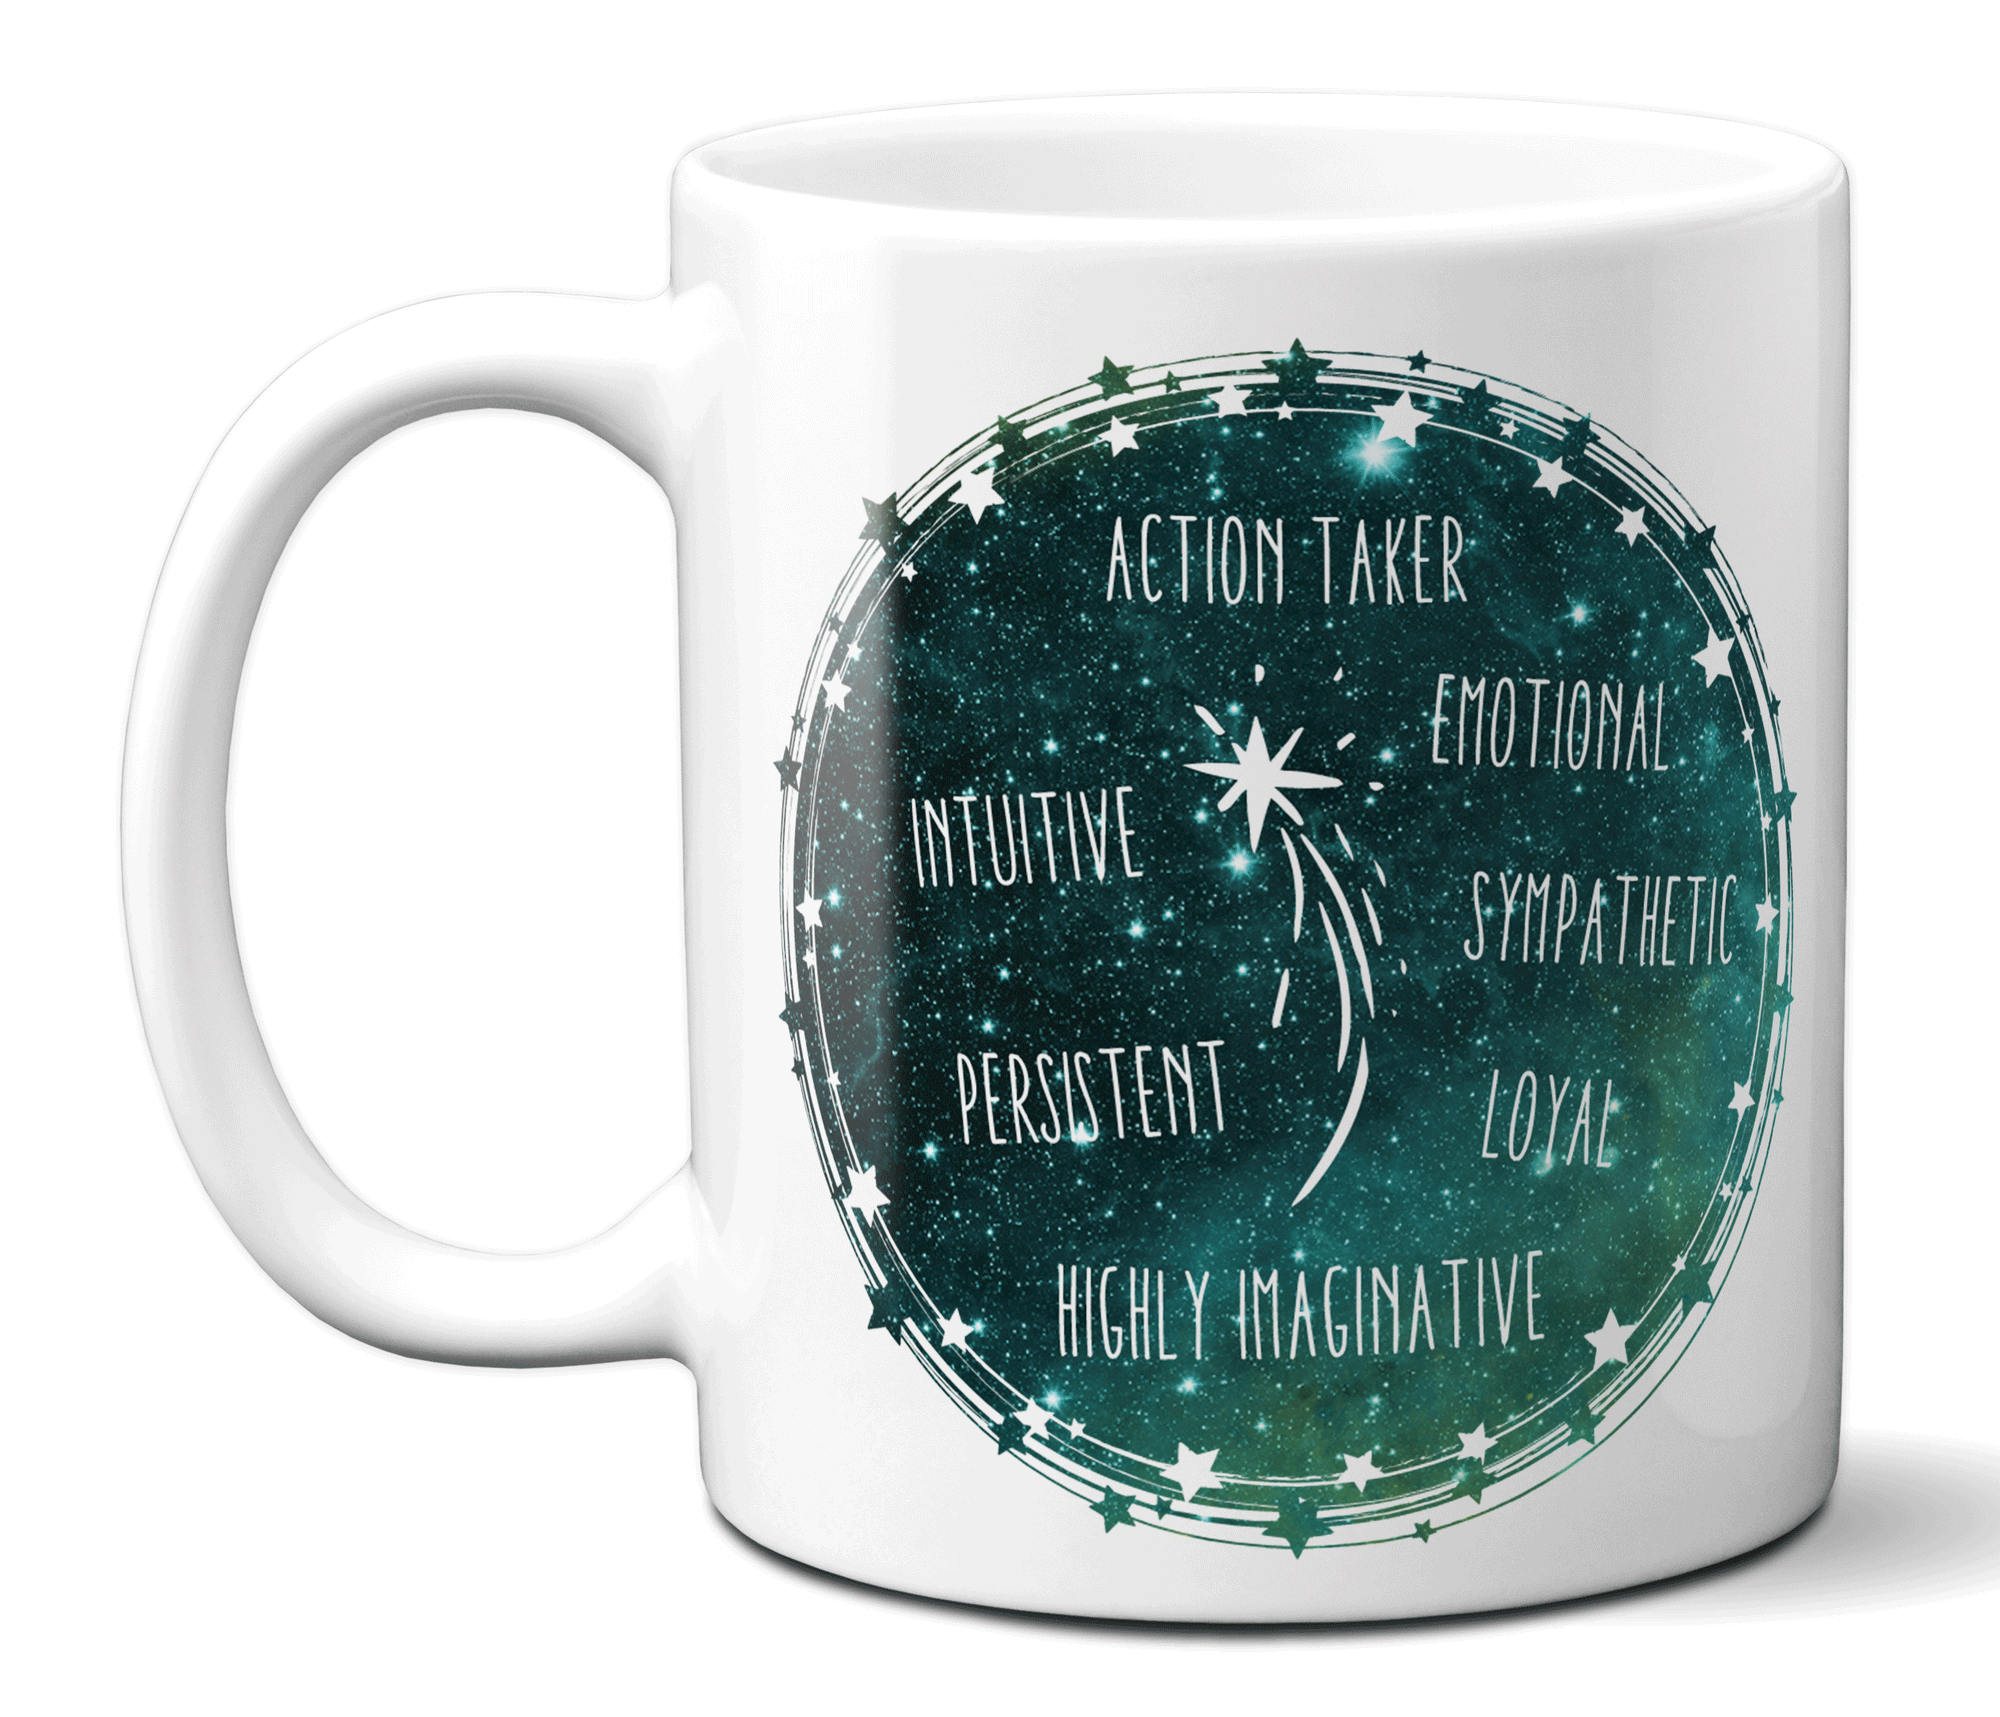 Cancer Zodiac Sign Coffee Mug | Horoscope, Astrology, Constellation | Unique Gift Idea | Two Sided